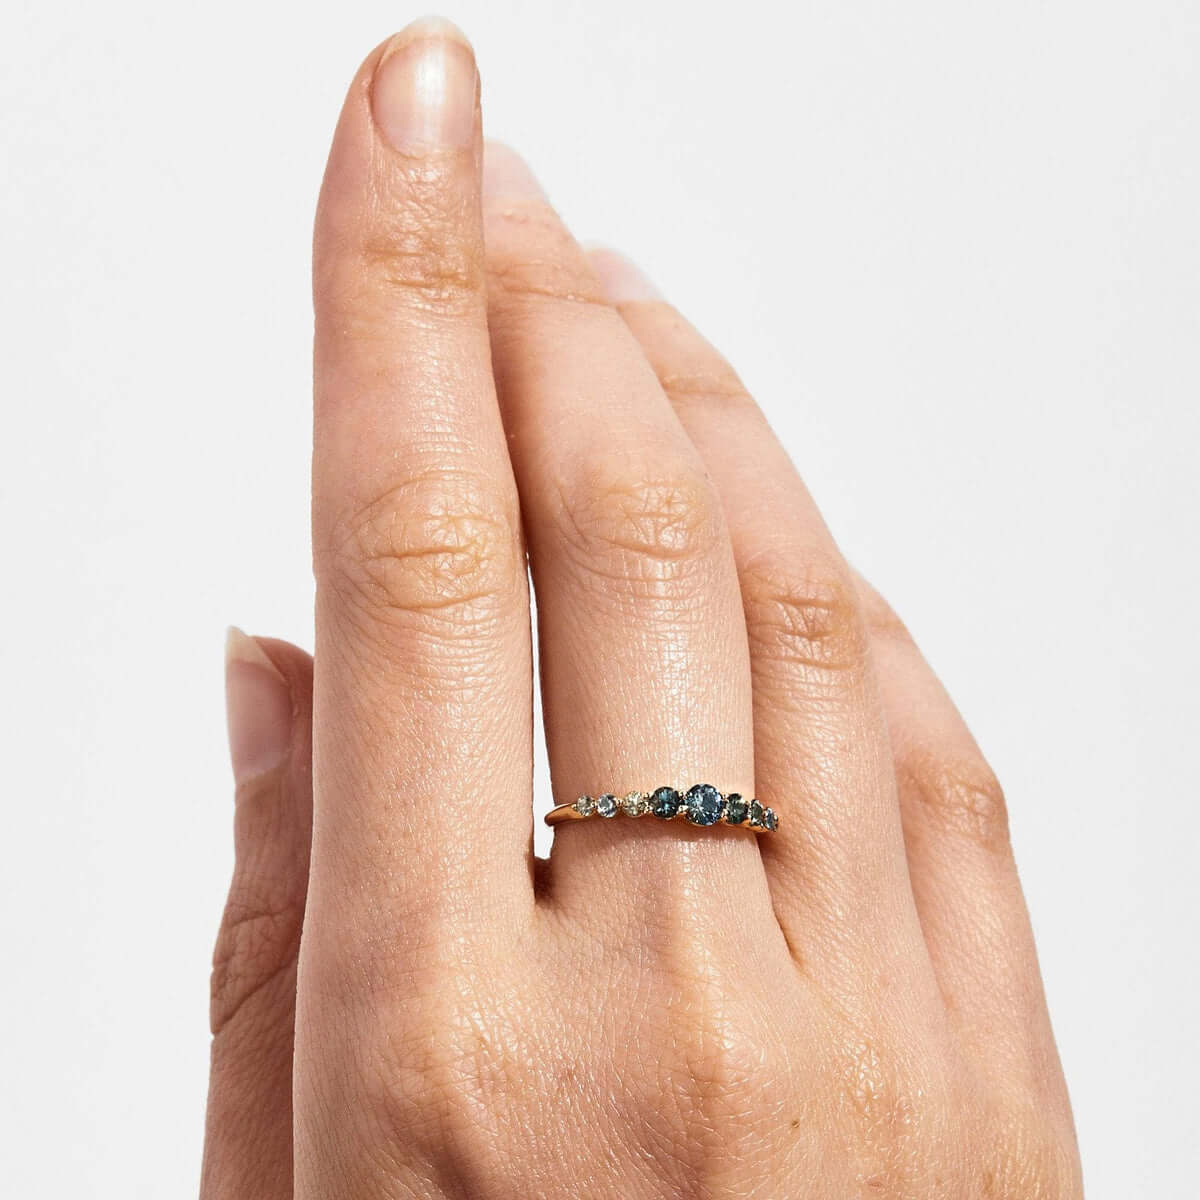 Edie Australian Sapphire Ring worn on a finger, displaying its unique multicolored sapphires and thin gold band.